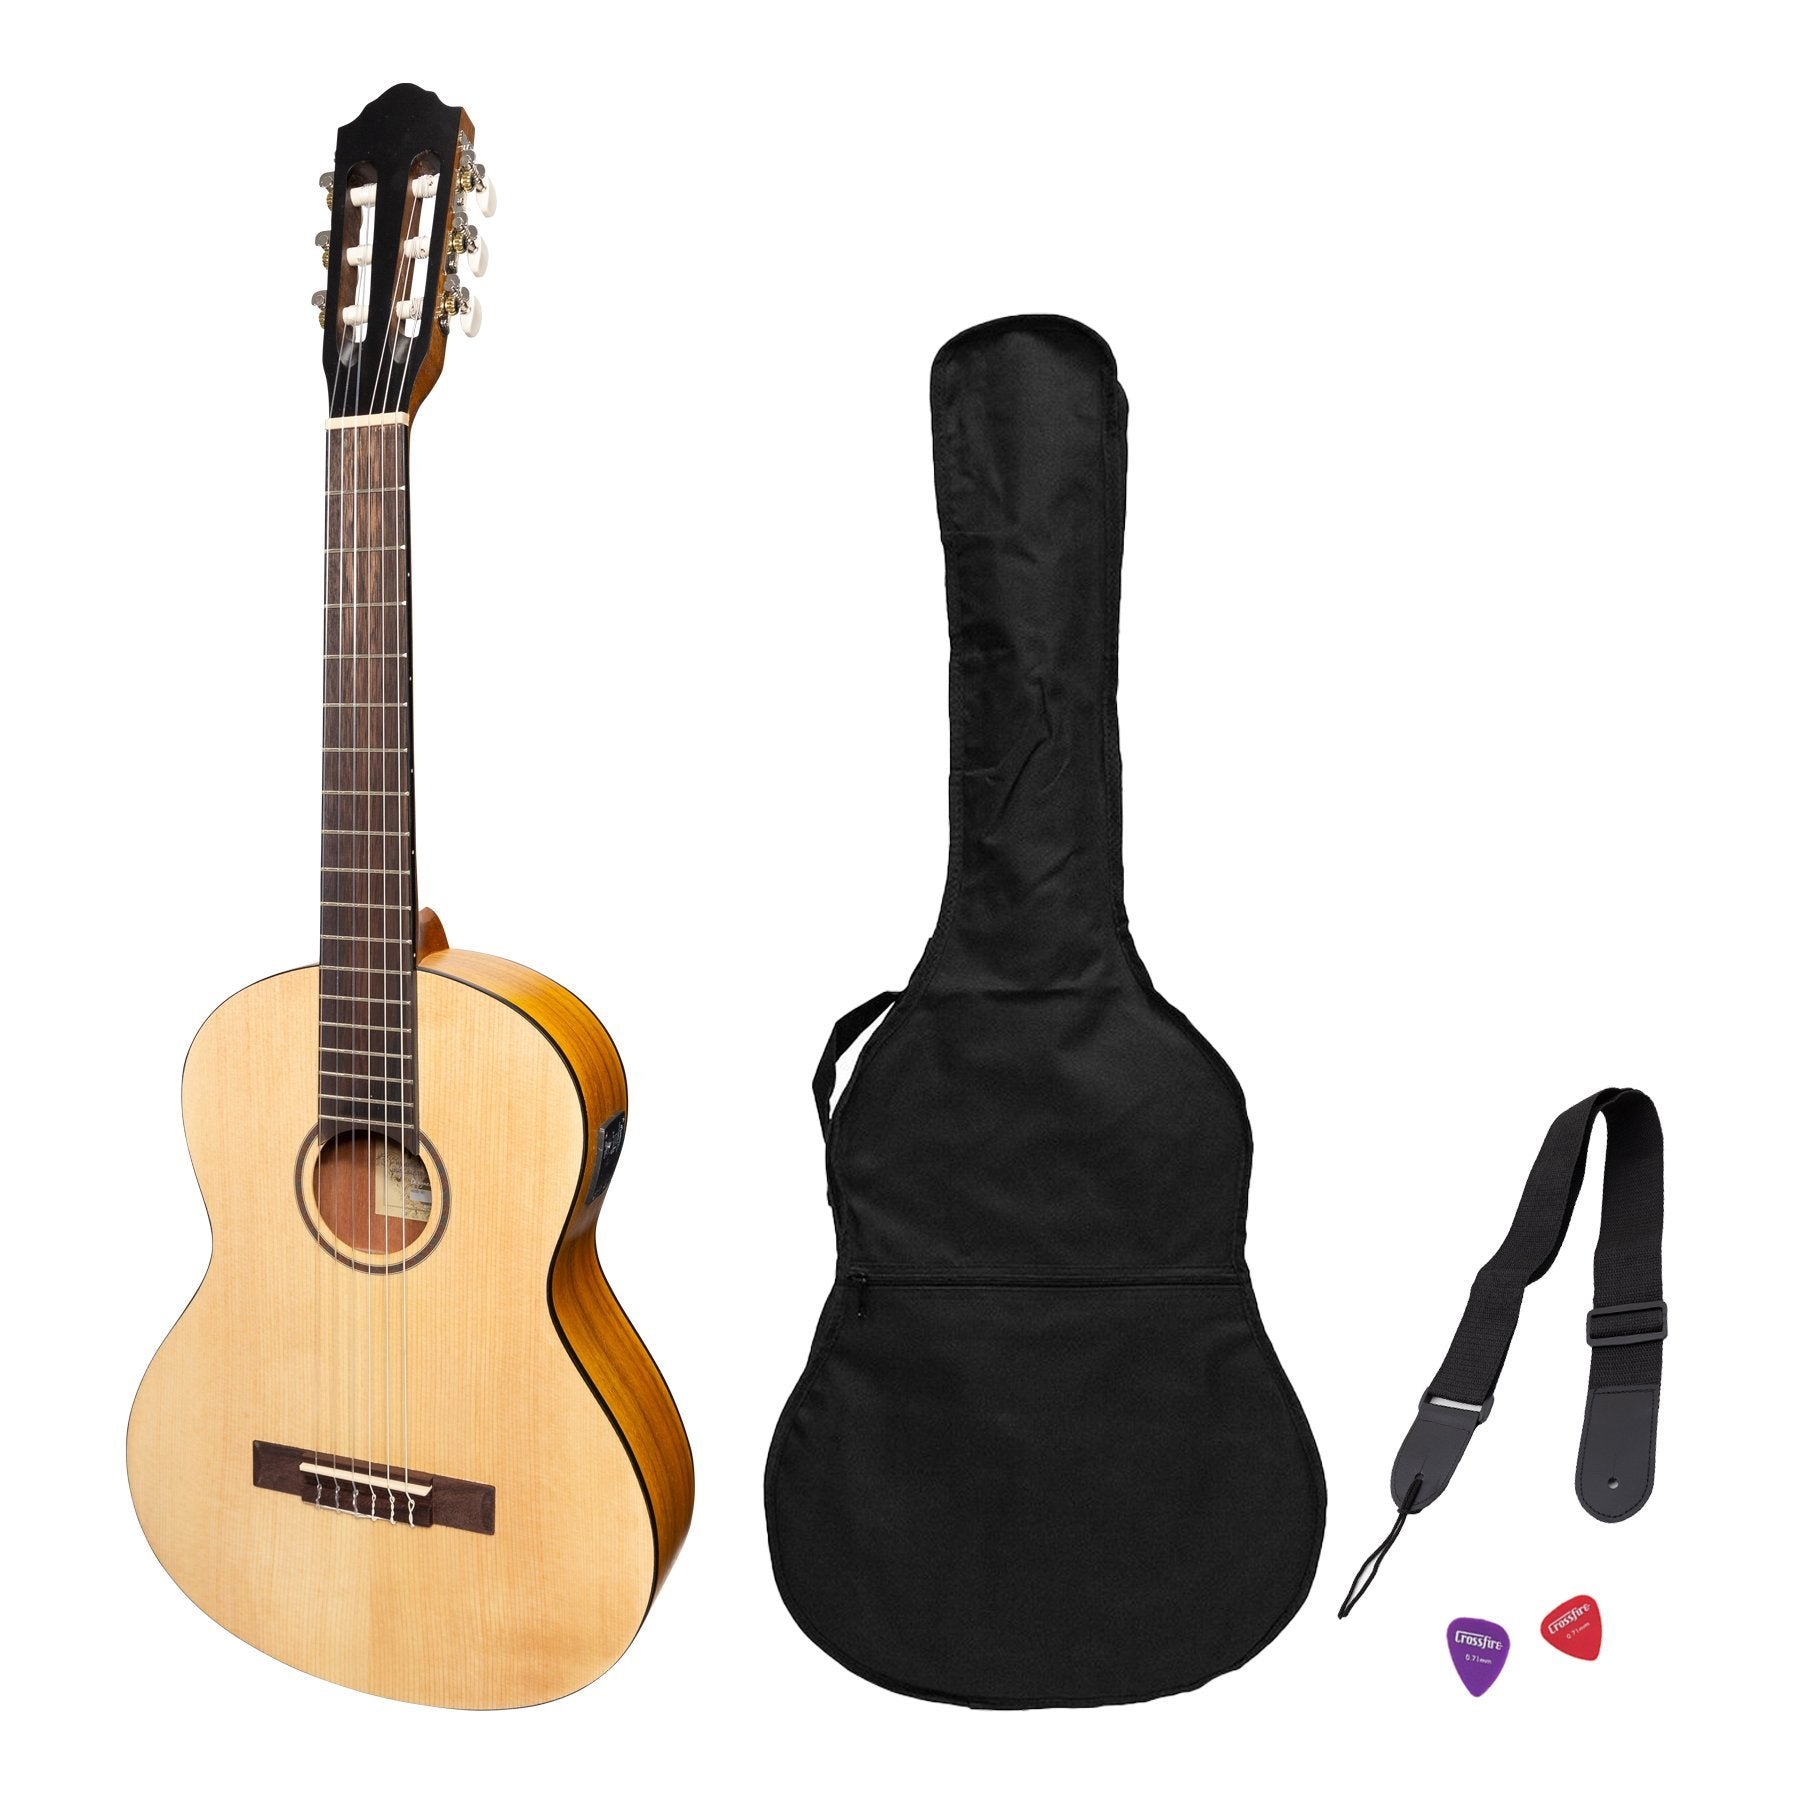 Martinez Left Handed 3/4 Size Student Classical Guitar Pack with Built In Tuner (Spruce/Koa)-MP-34TL-SK